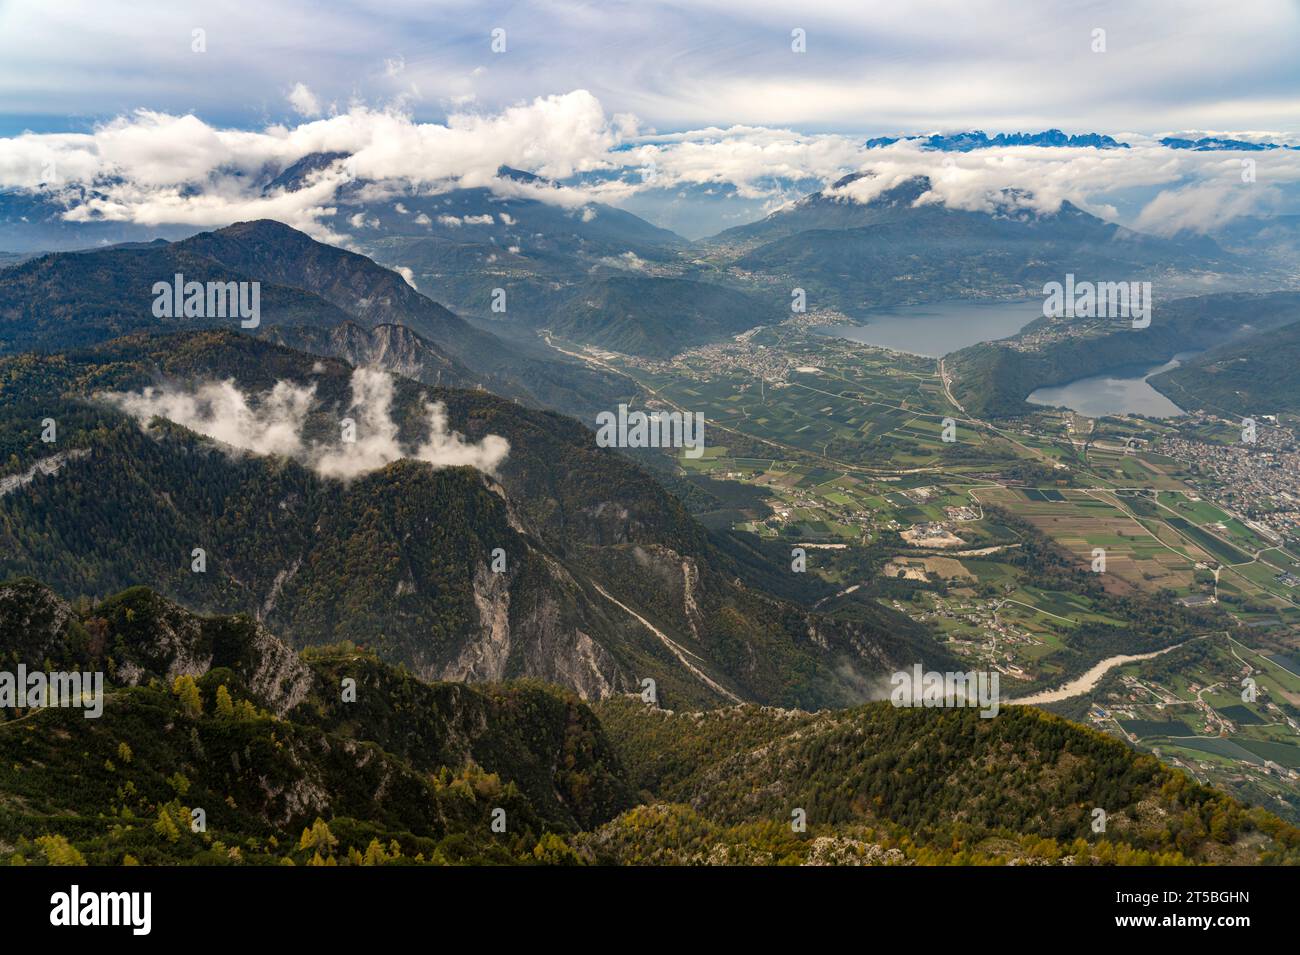 Blick vom Gipfel des Berg Pizzo di Levico auf die Seen im Suganertal, Trentino, Italien, Europa |  View from the summit  of mount Pizzo di Levico to t Stock Photo